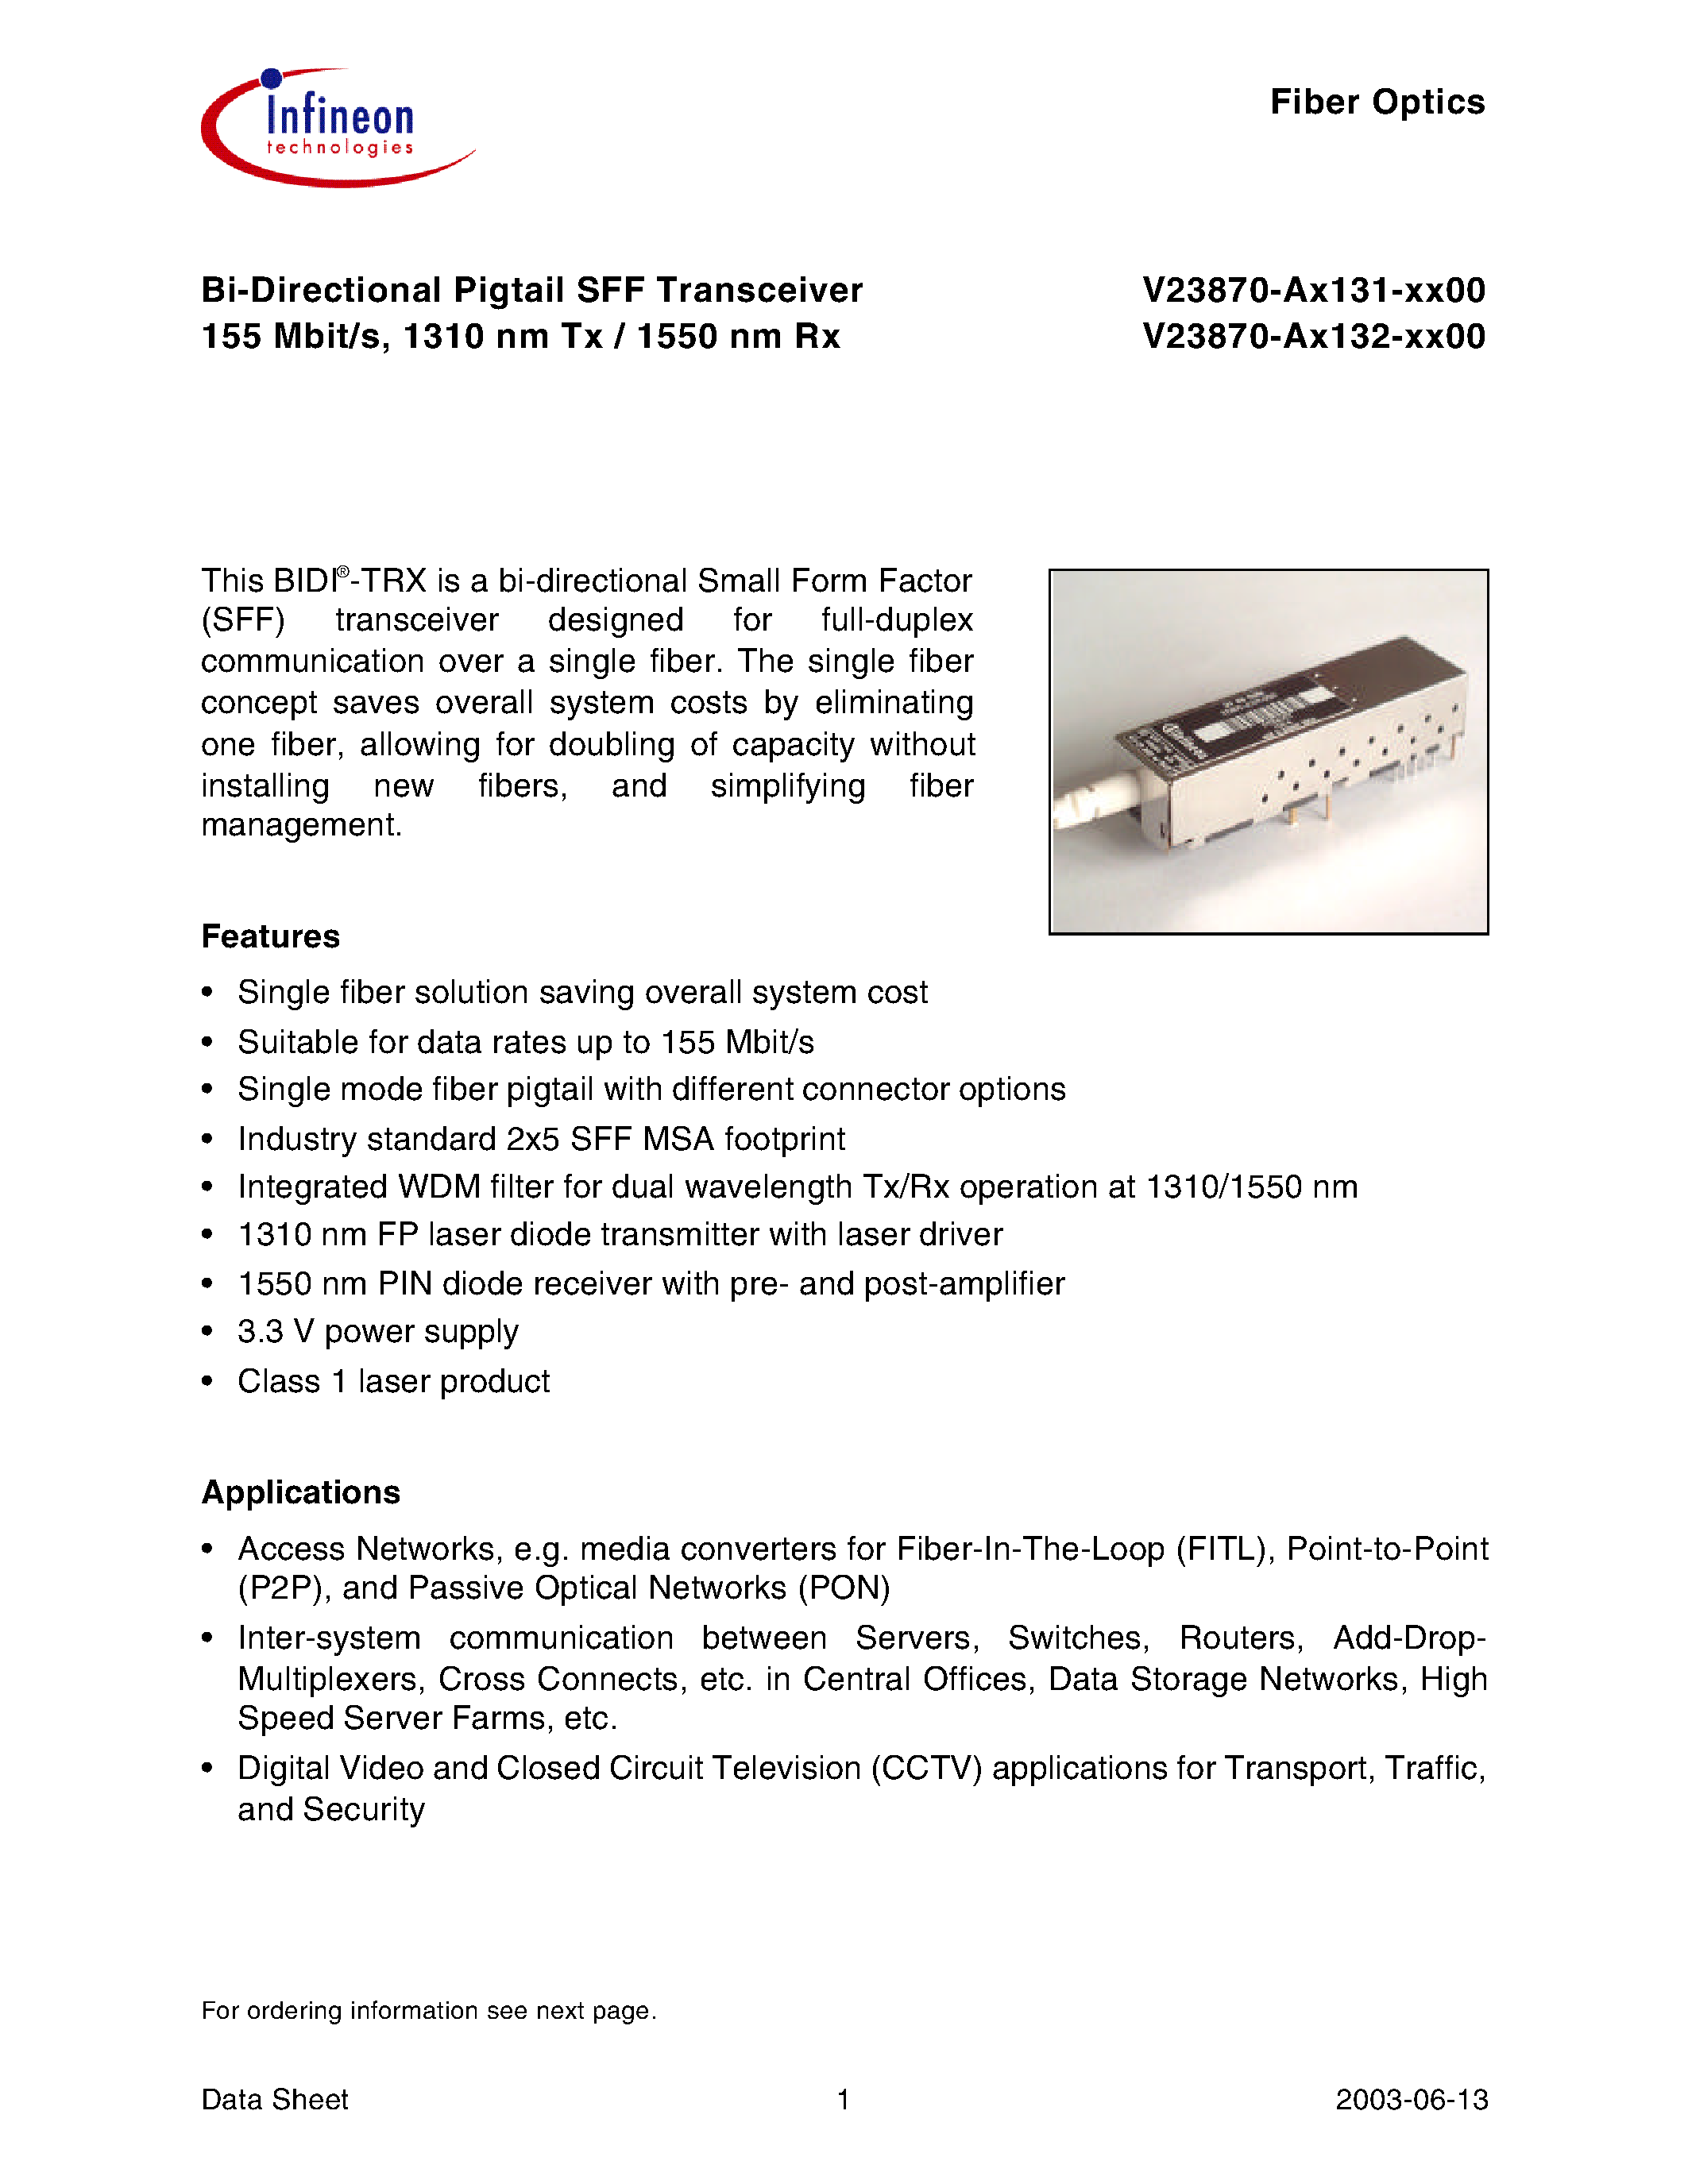 Datasheet V23870-A1131-A100 - Bi-Directional Pigtail SFF Transceiver 155 Mbit/s/ 1310 nm Tx / 1550 nm Rx page 1